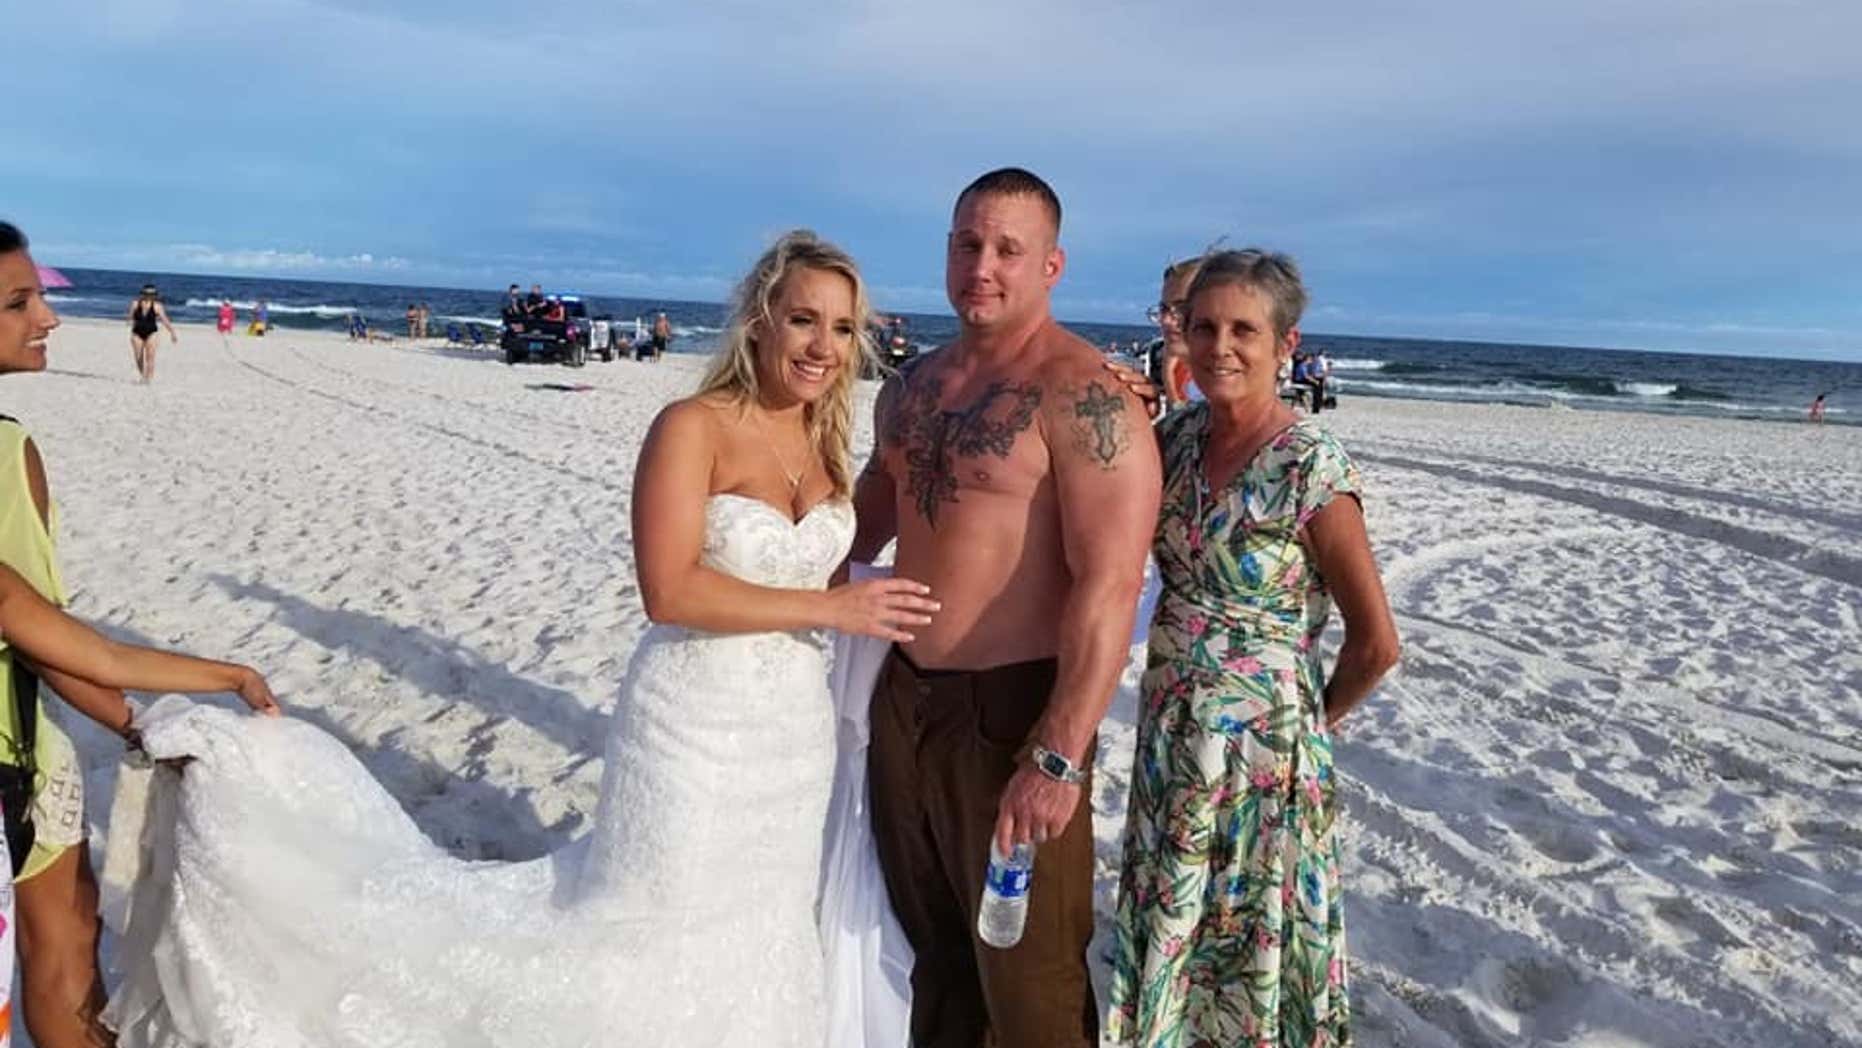 Groom Rescues Struggling Swimmer Moments After Beach Wedding Fox News